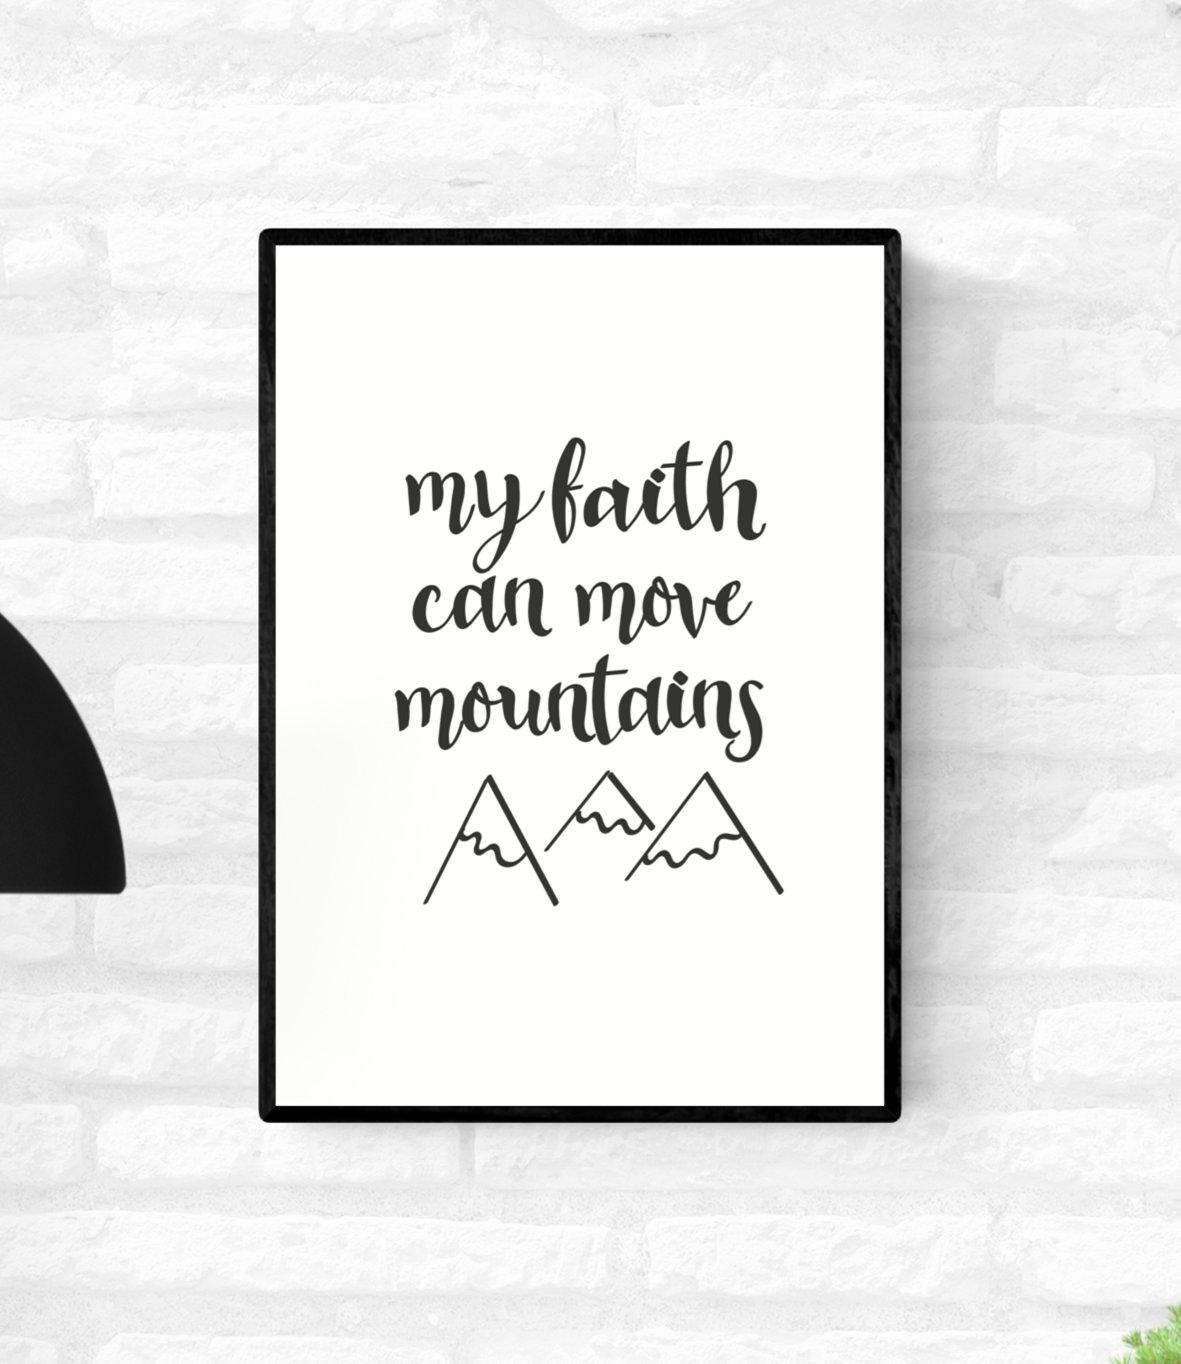 Framed wall art quote print with the words, “my faith can move mountains” and line drawings of mountain peaks